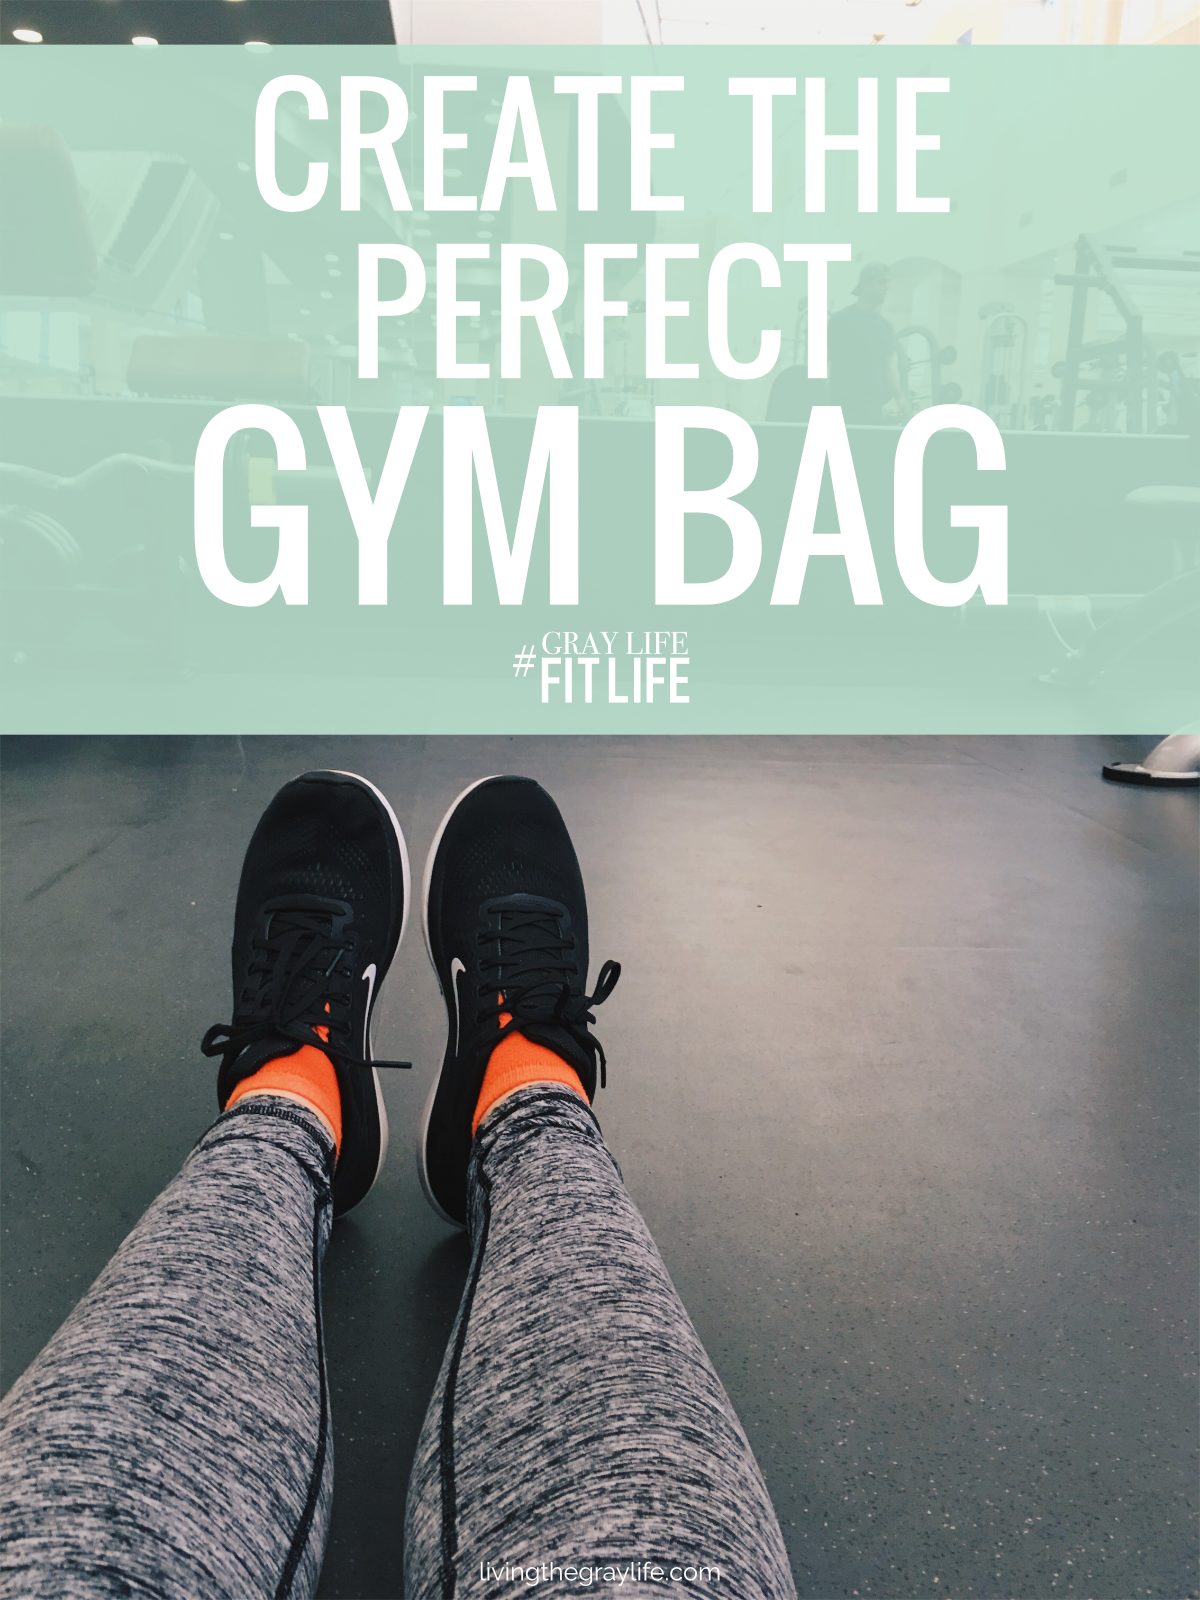 Create the perfect gym bag with Amazon Prime Student.